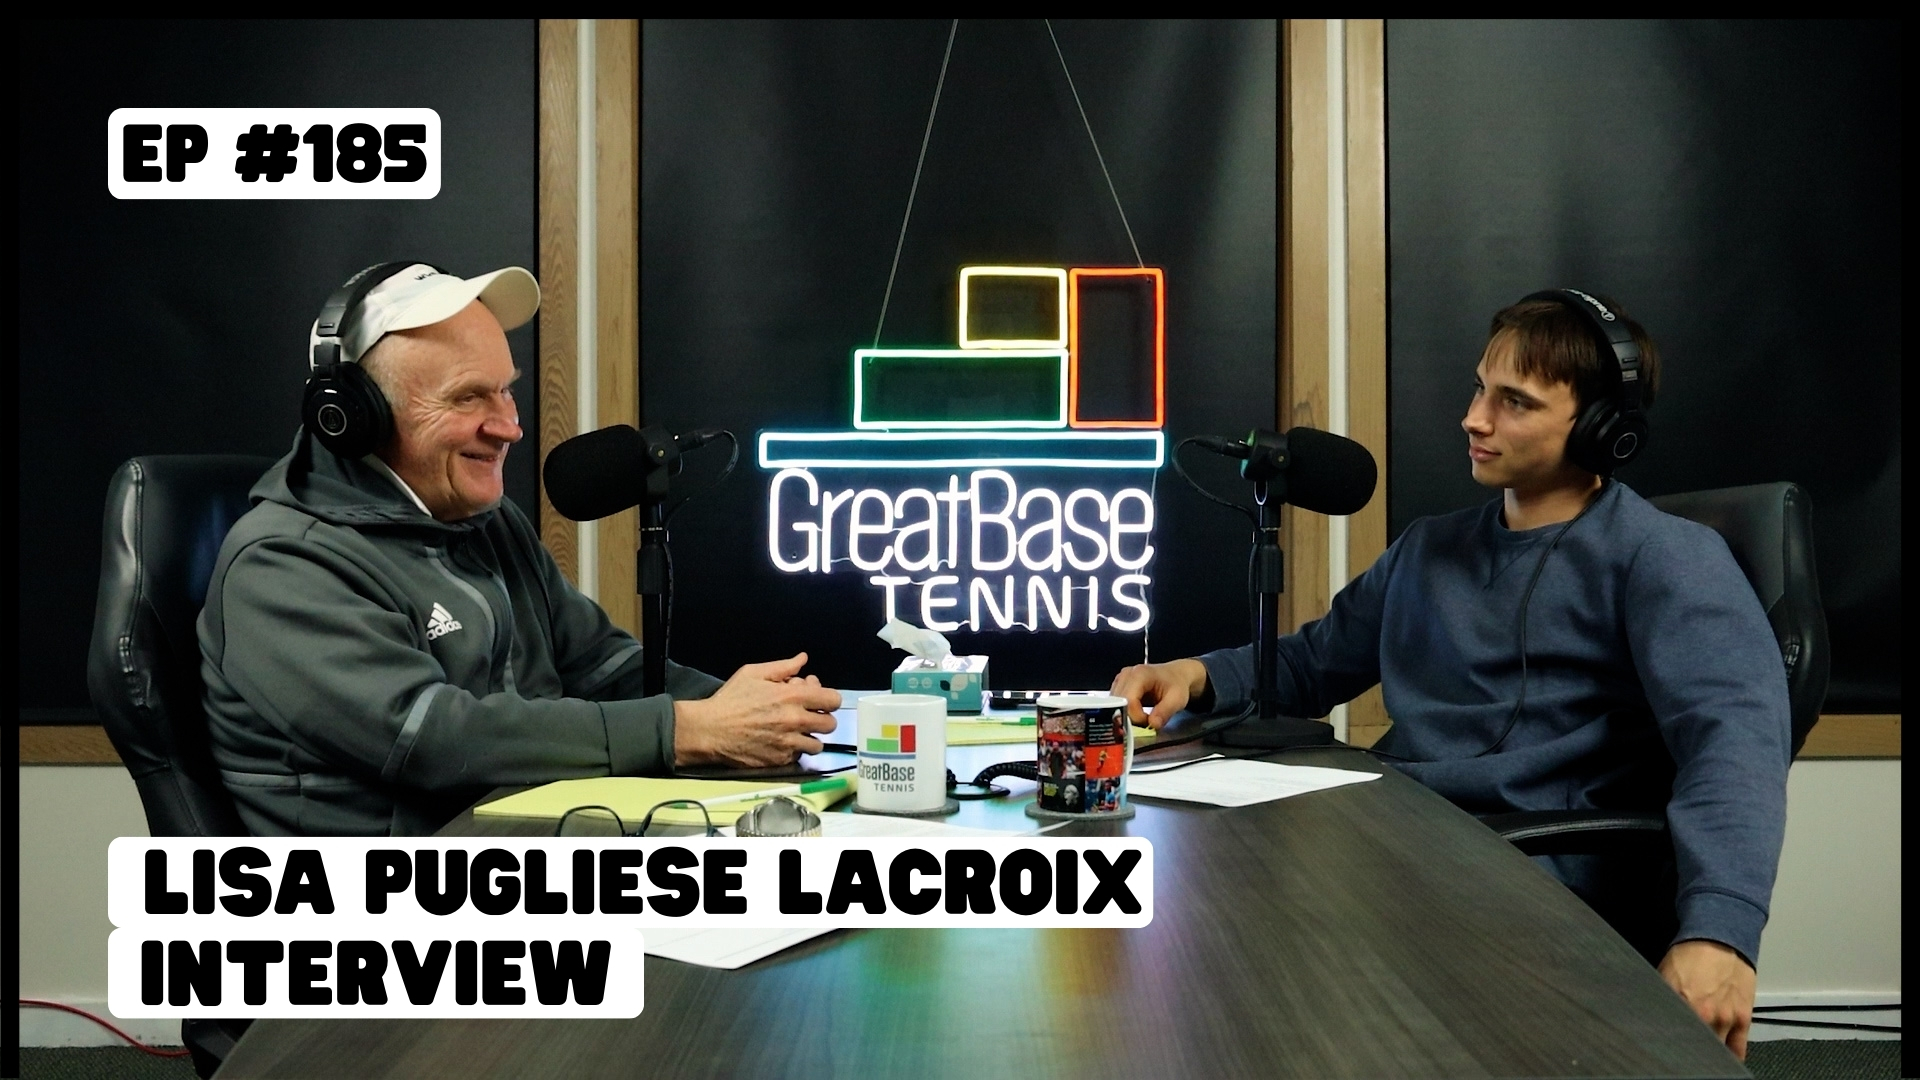 The GreatBase Tennis Podcast Episode 185 - Lisa Pugliese LaCroix Interview